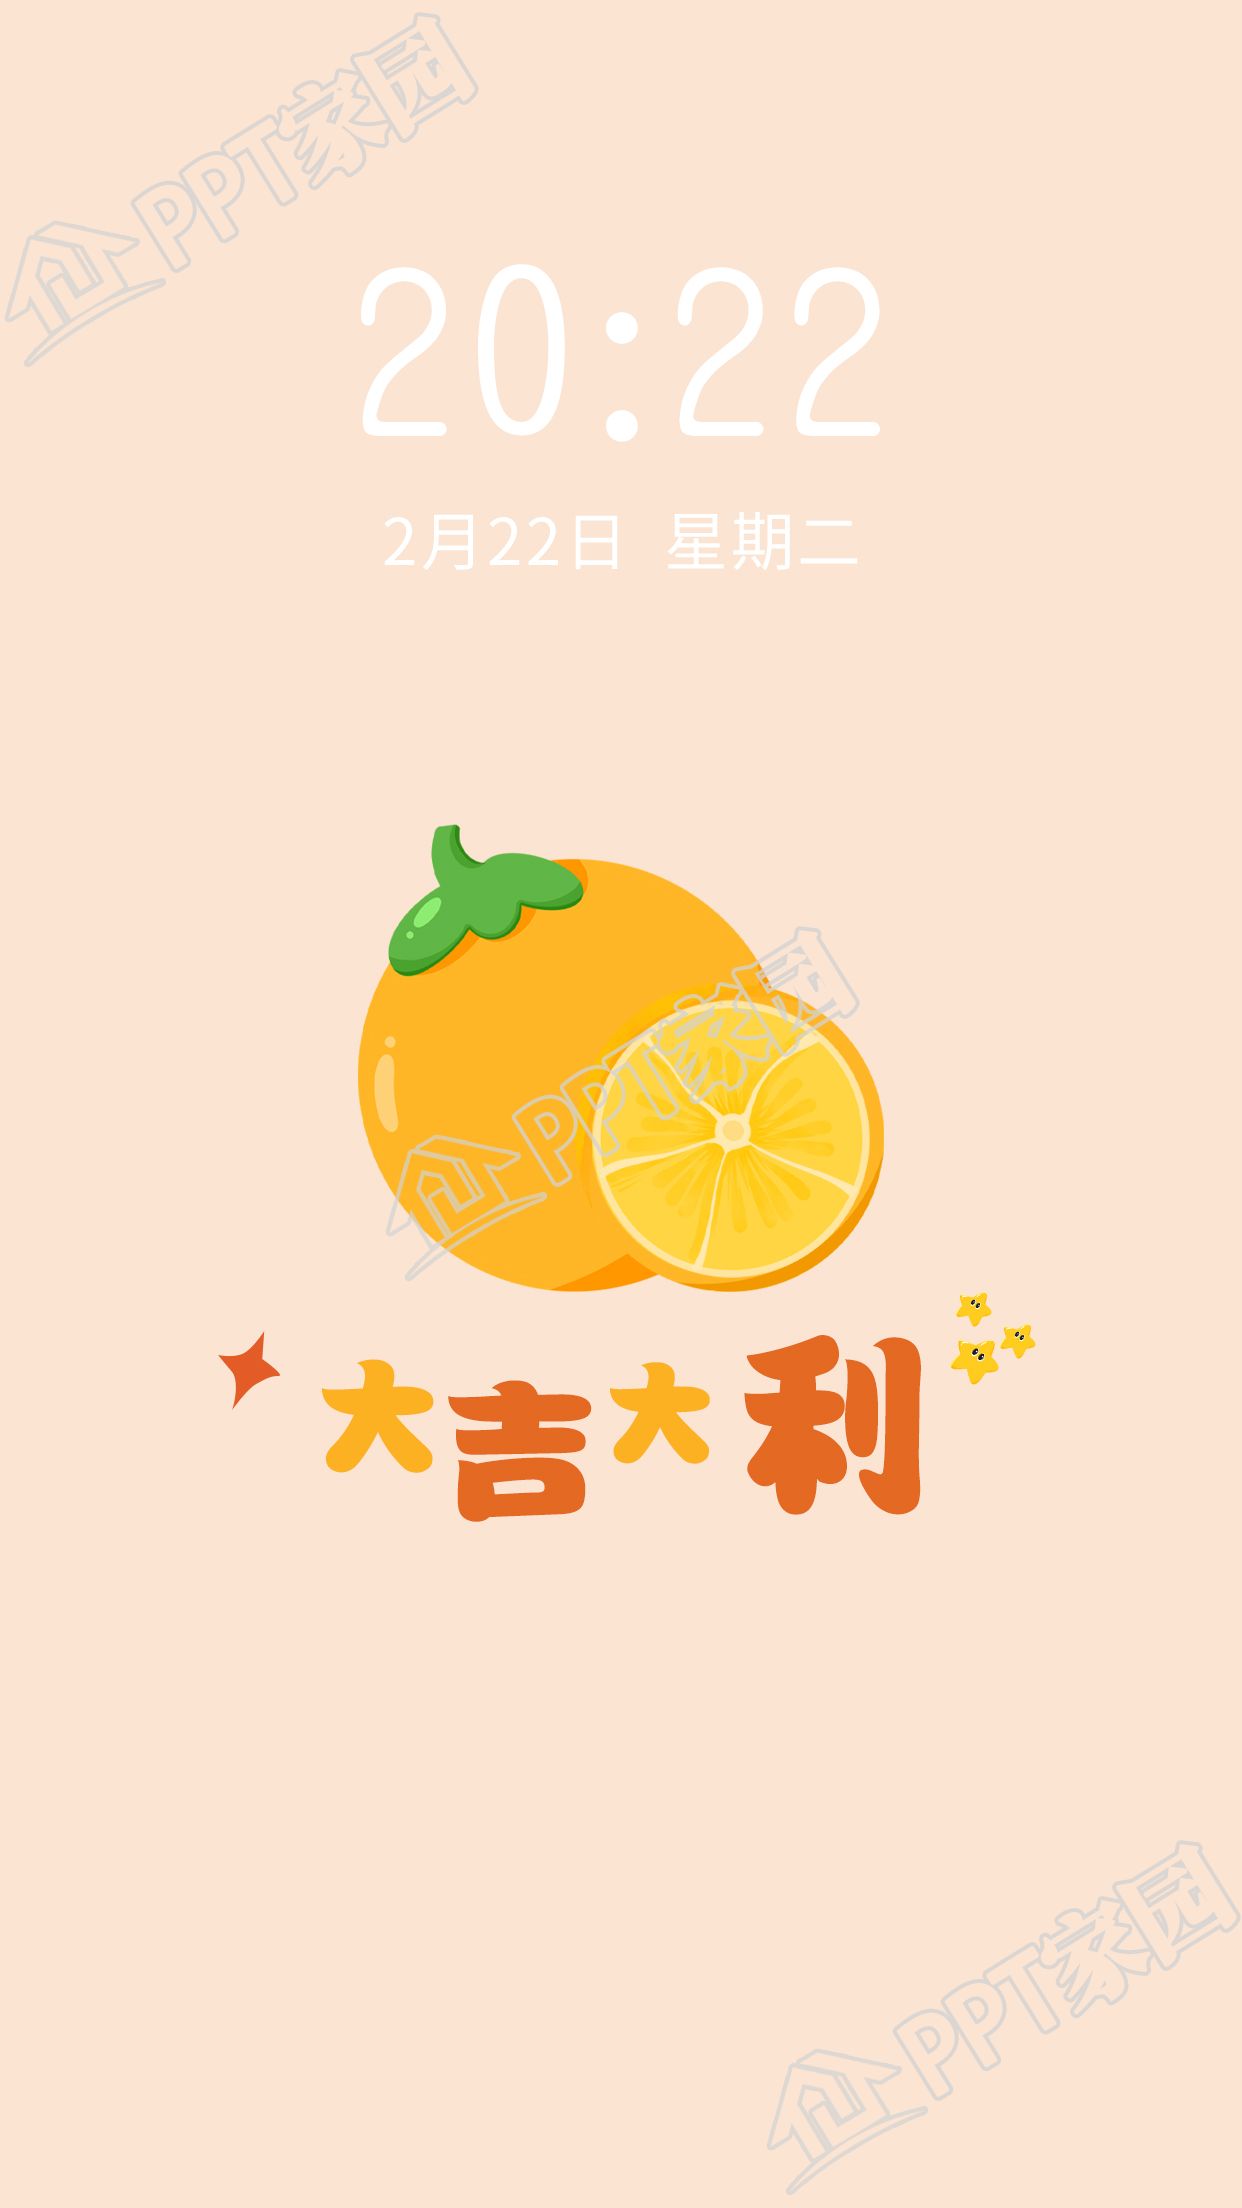 Orange fruit theme good luck meaning mobile phone wallpaper download recommended